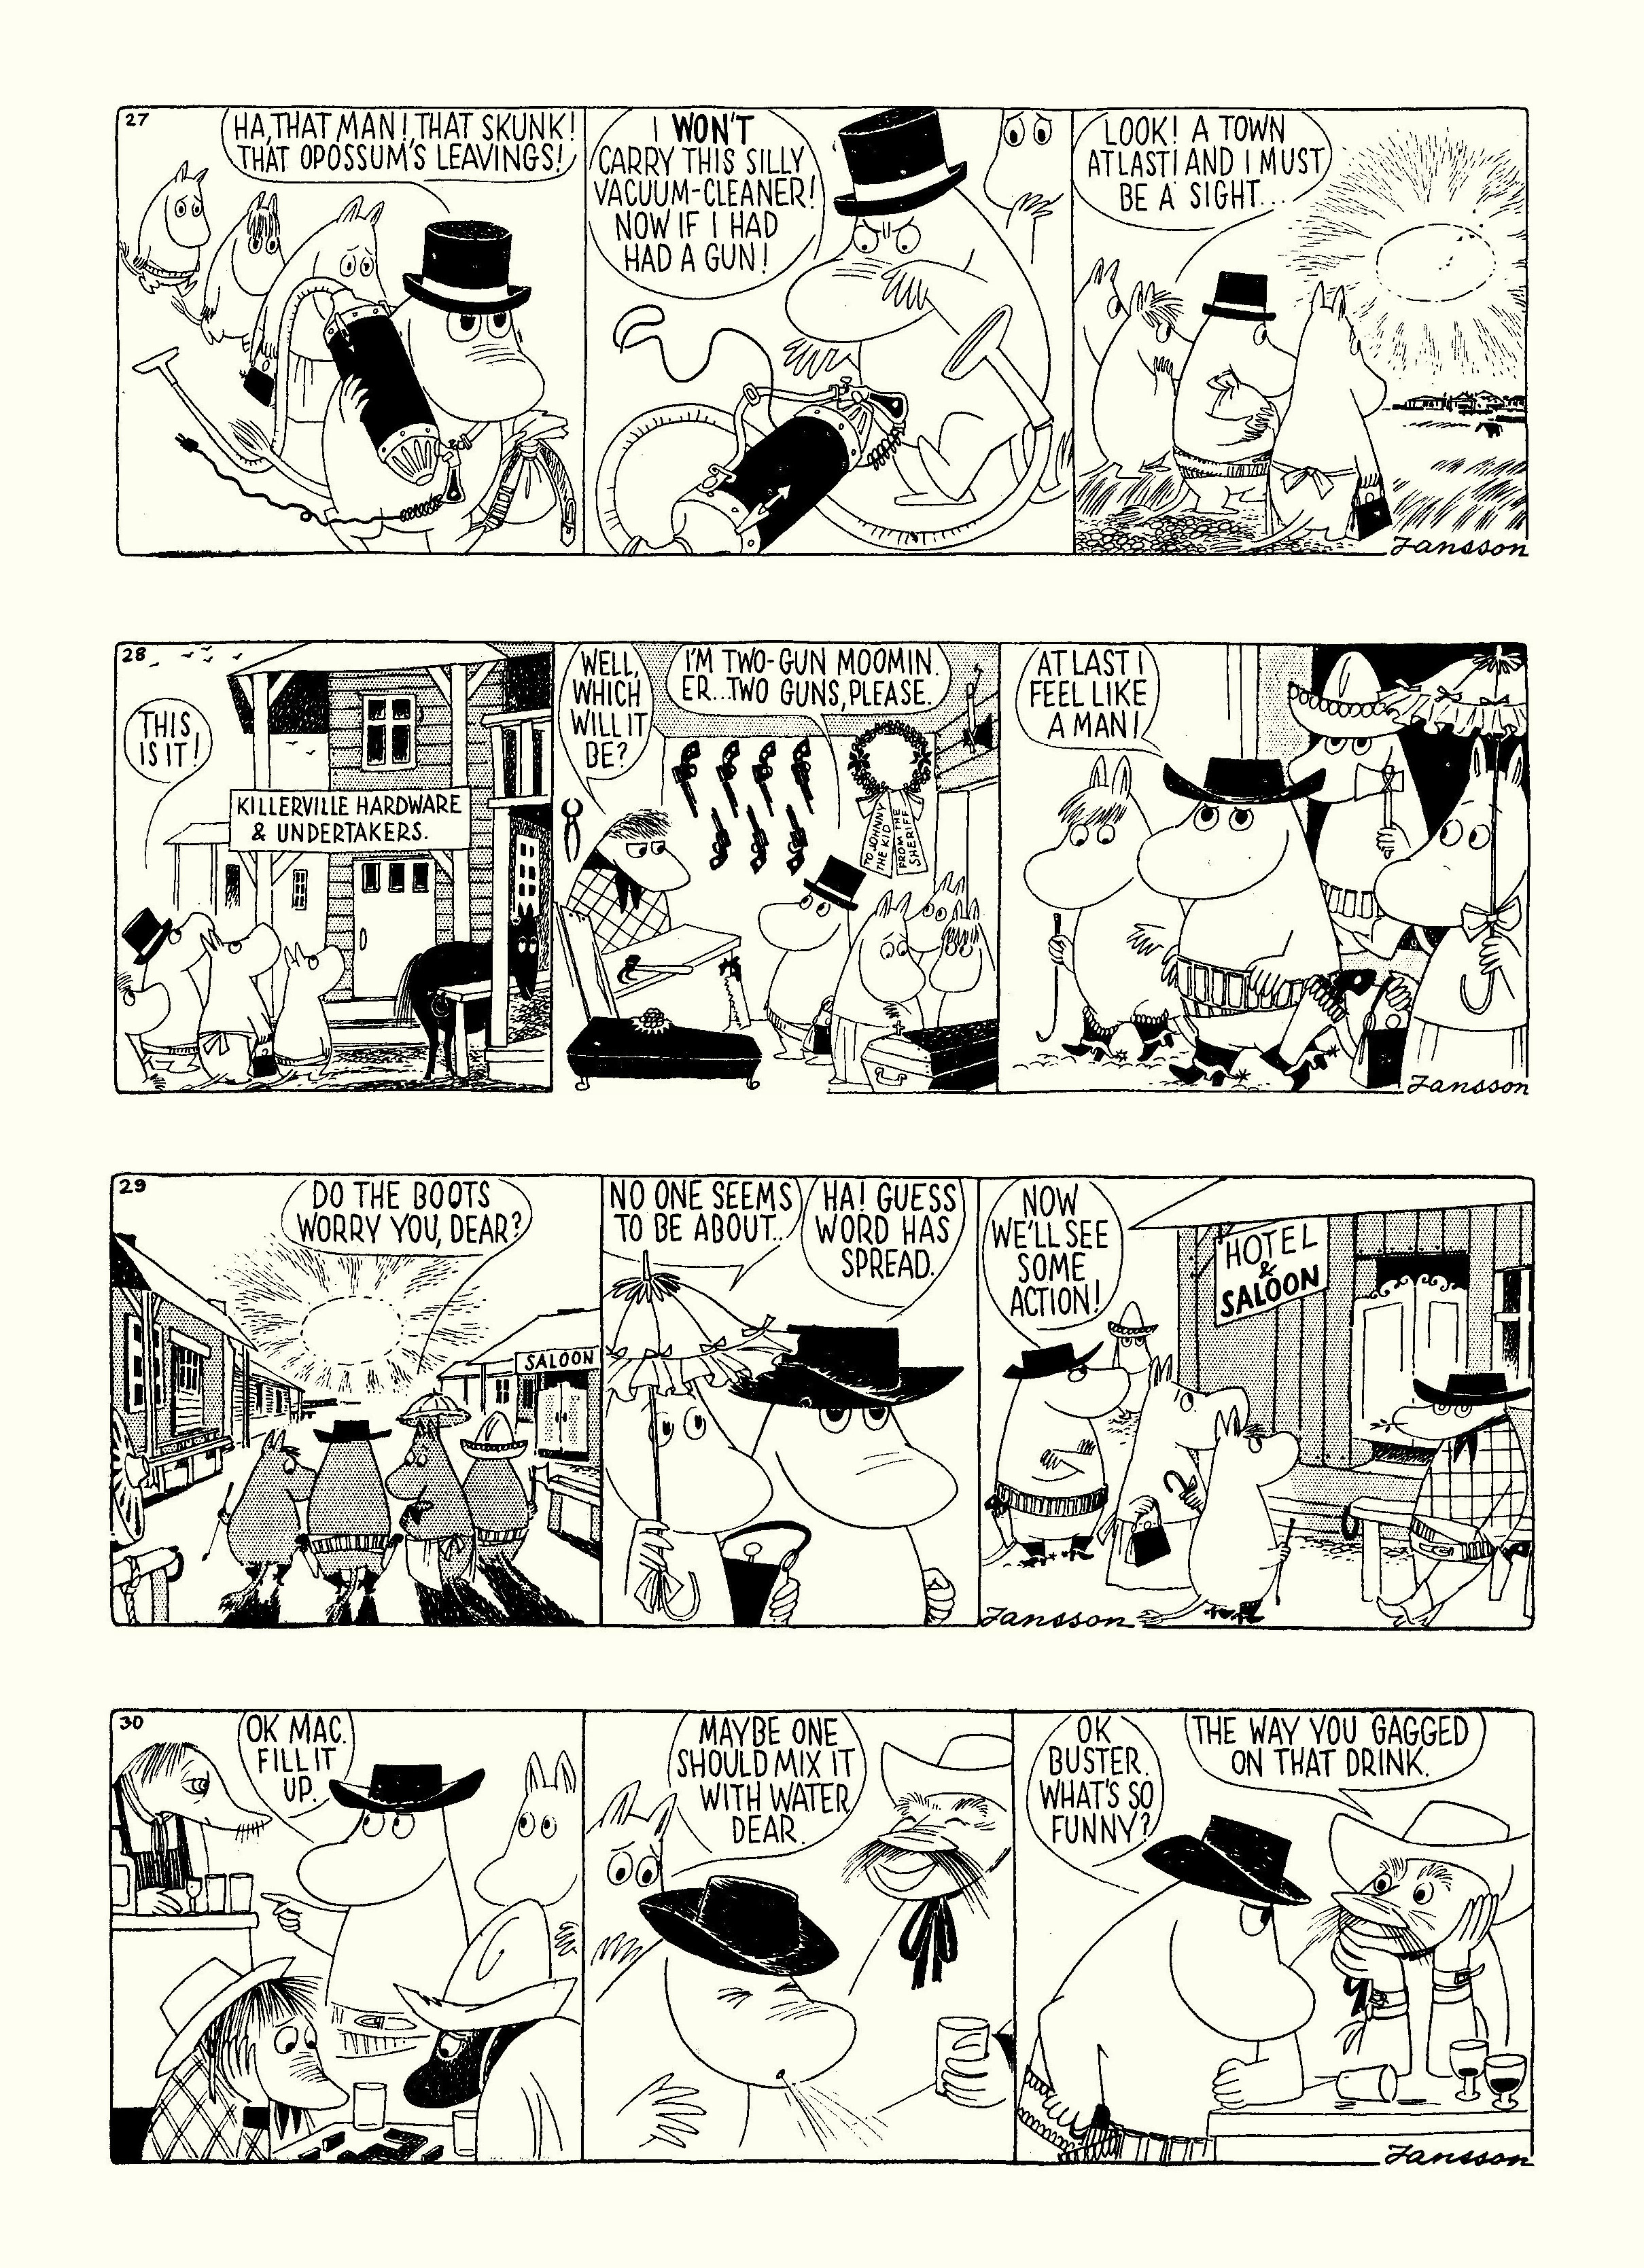 Read online Moomin: The Complete Tove Jansson Comic Strip comic -  Issue # TPB 4 - 13